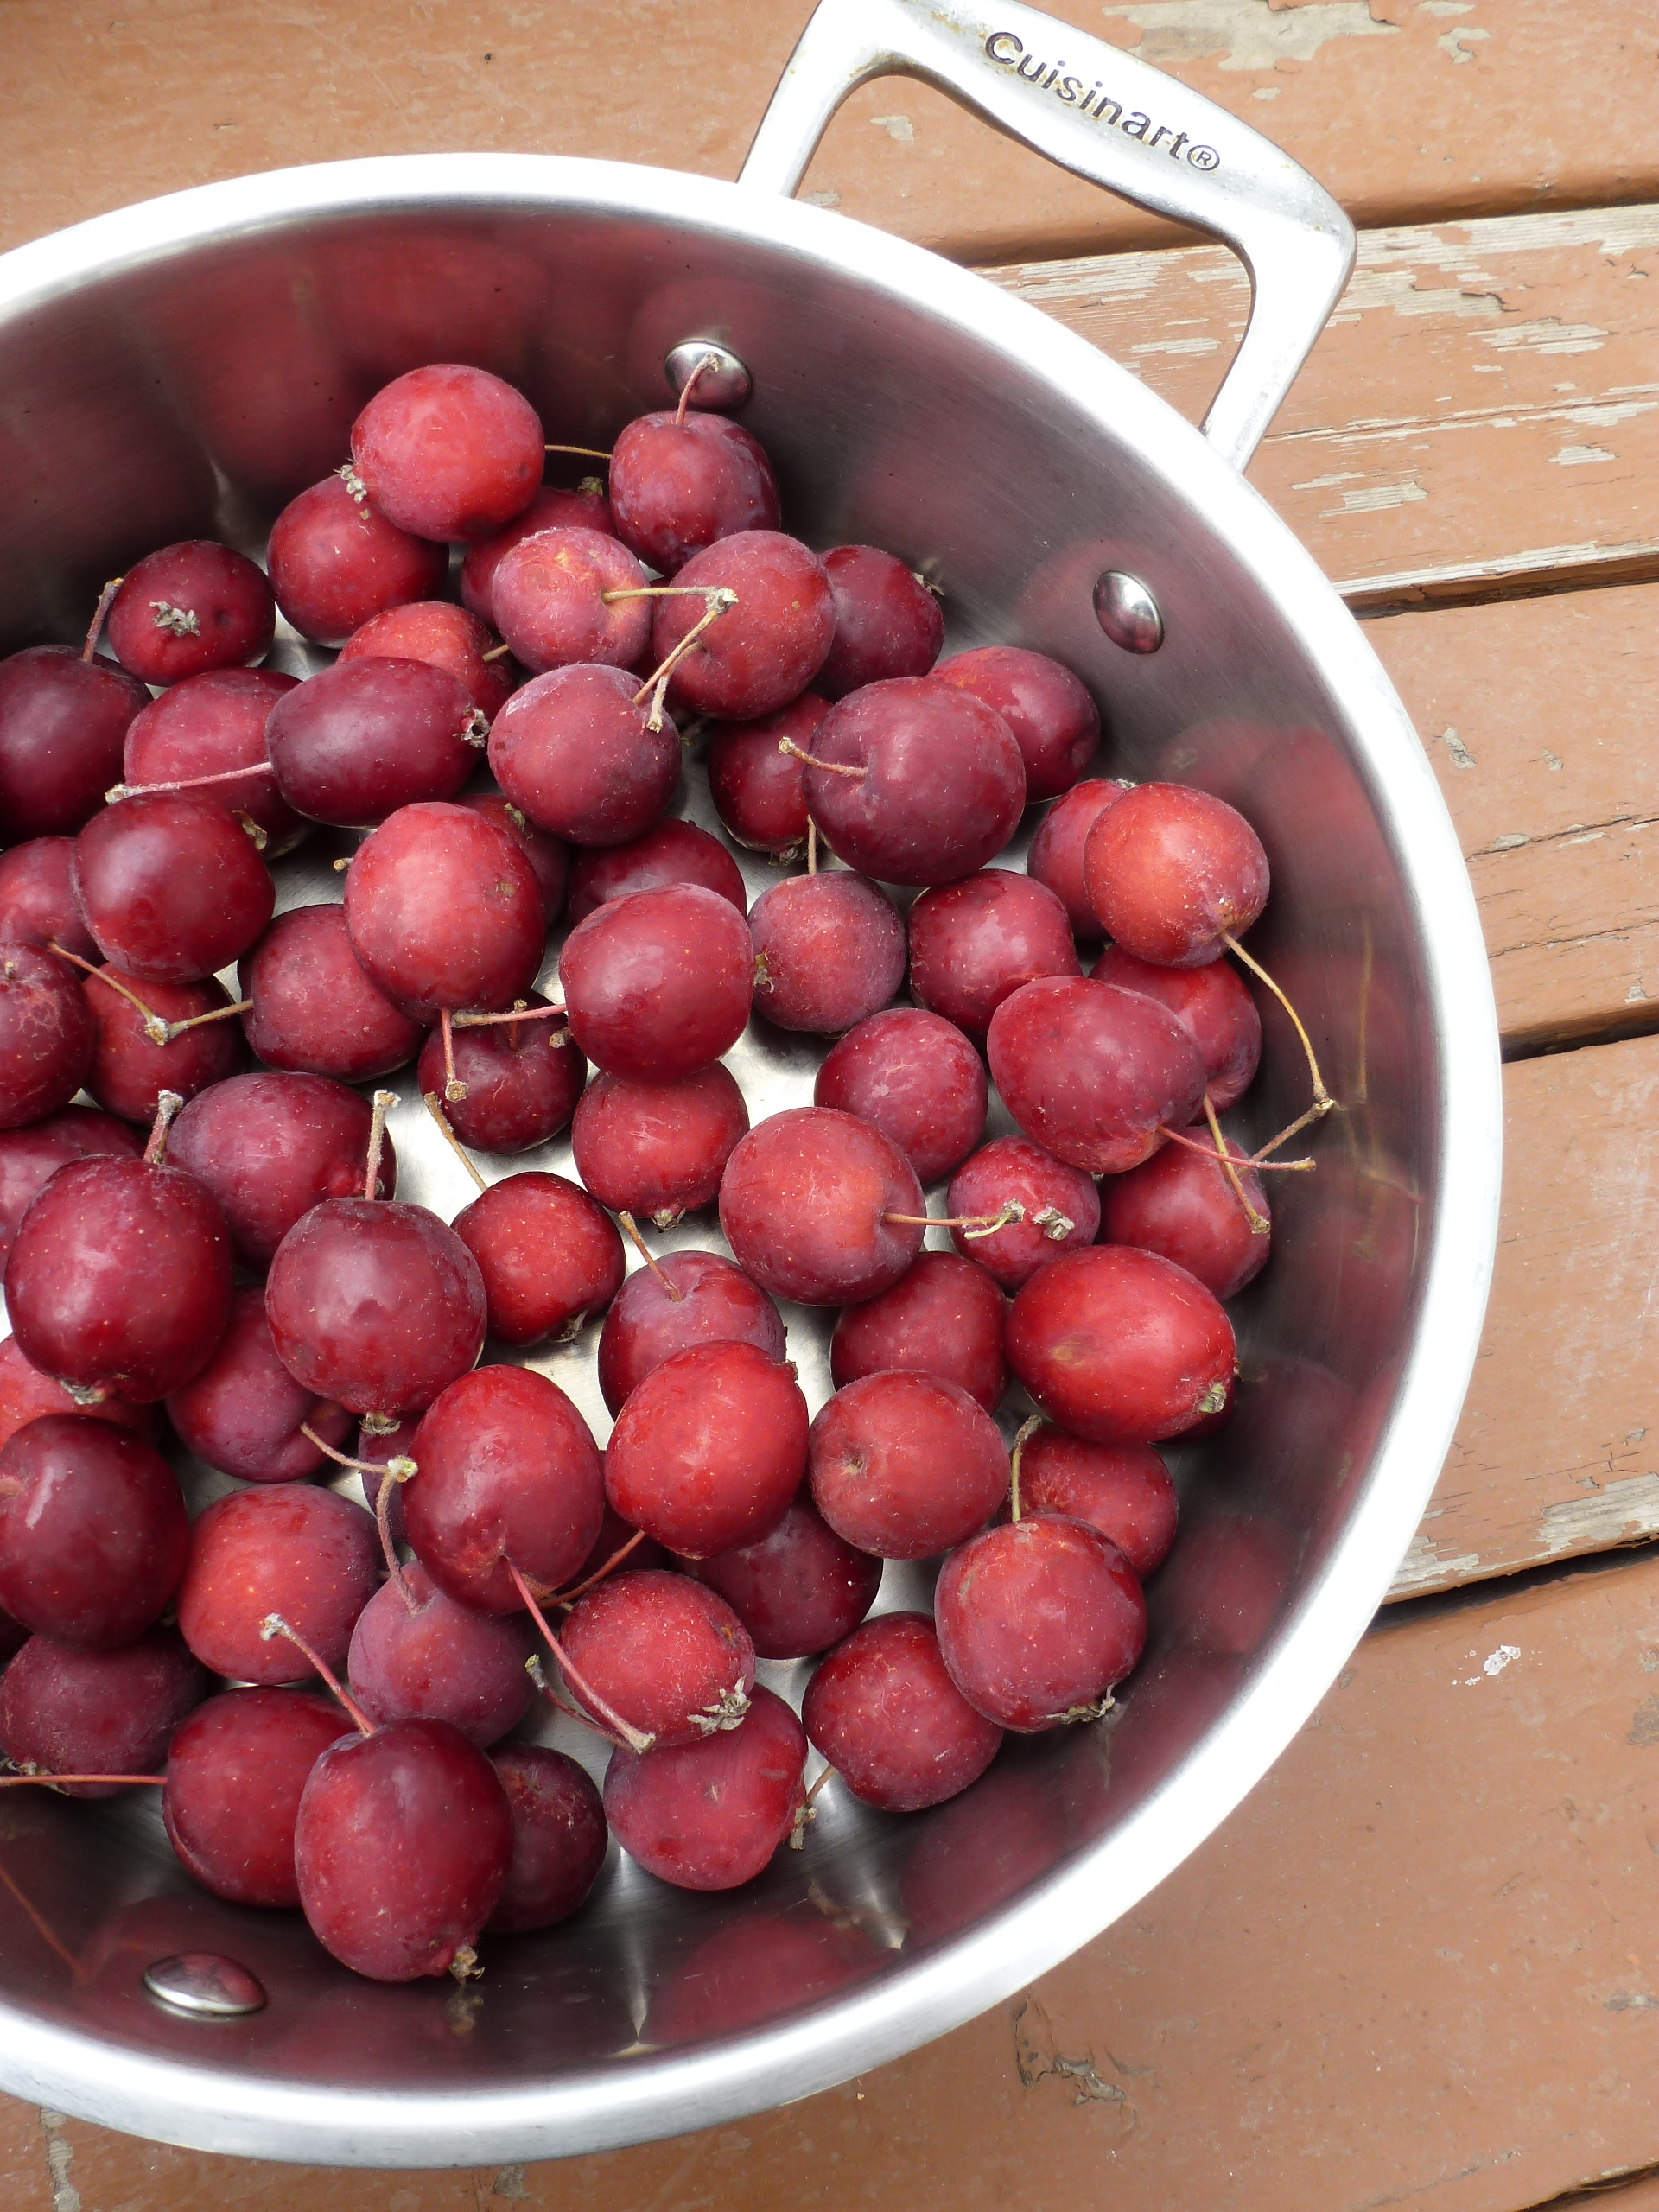 A pot of Dolgo crabapples, ready to be made into jelly